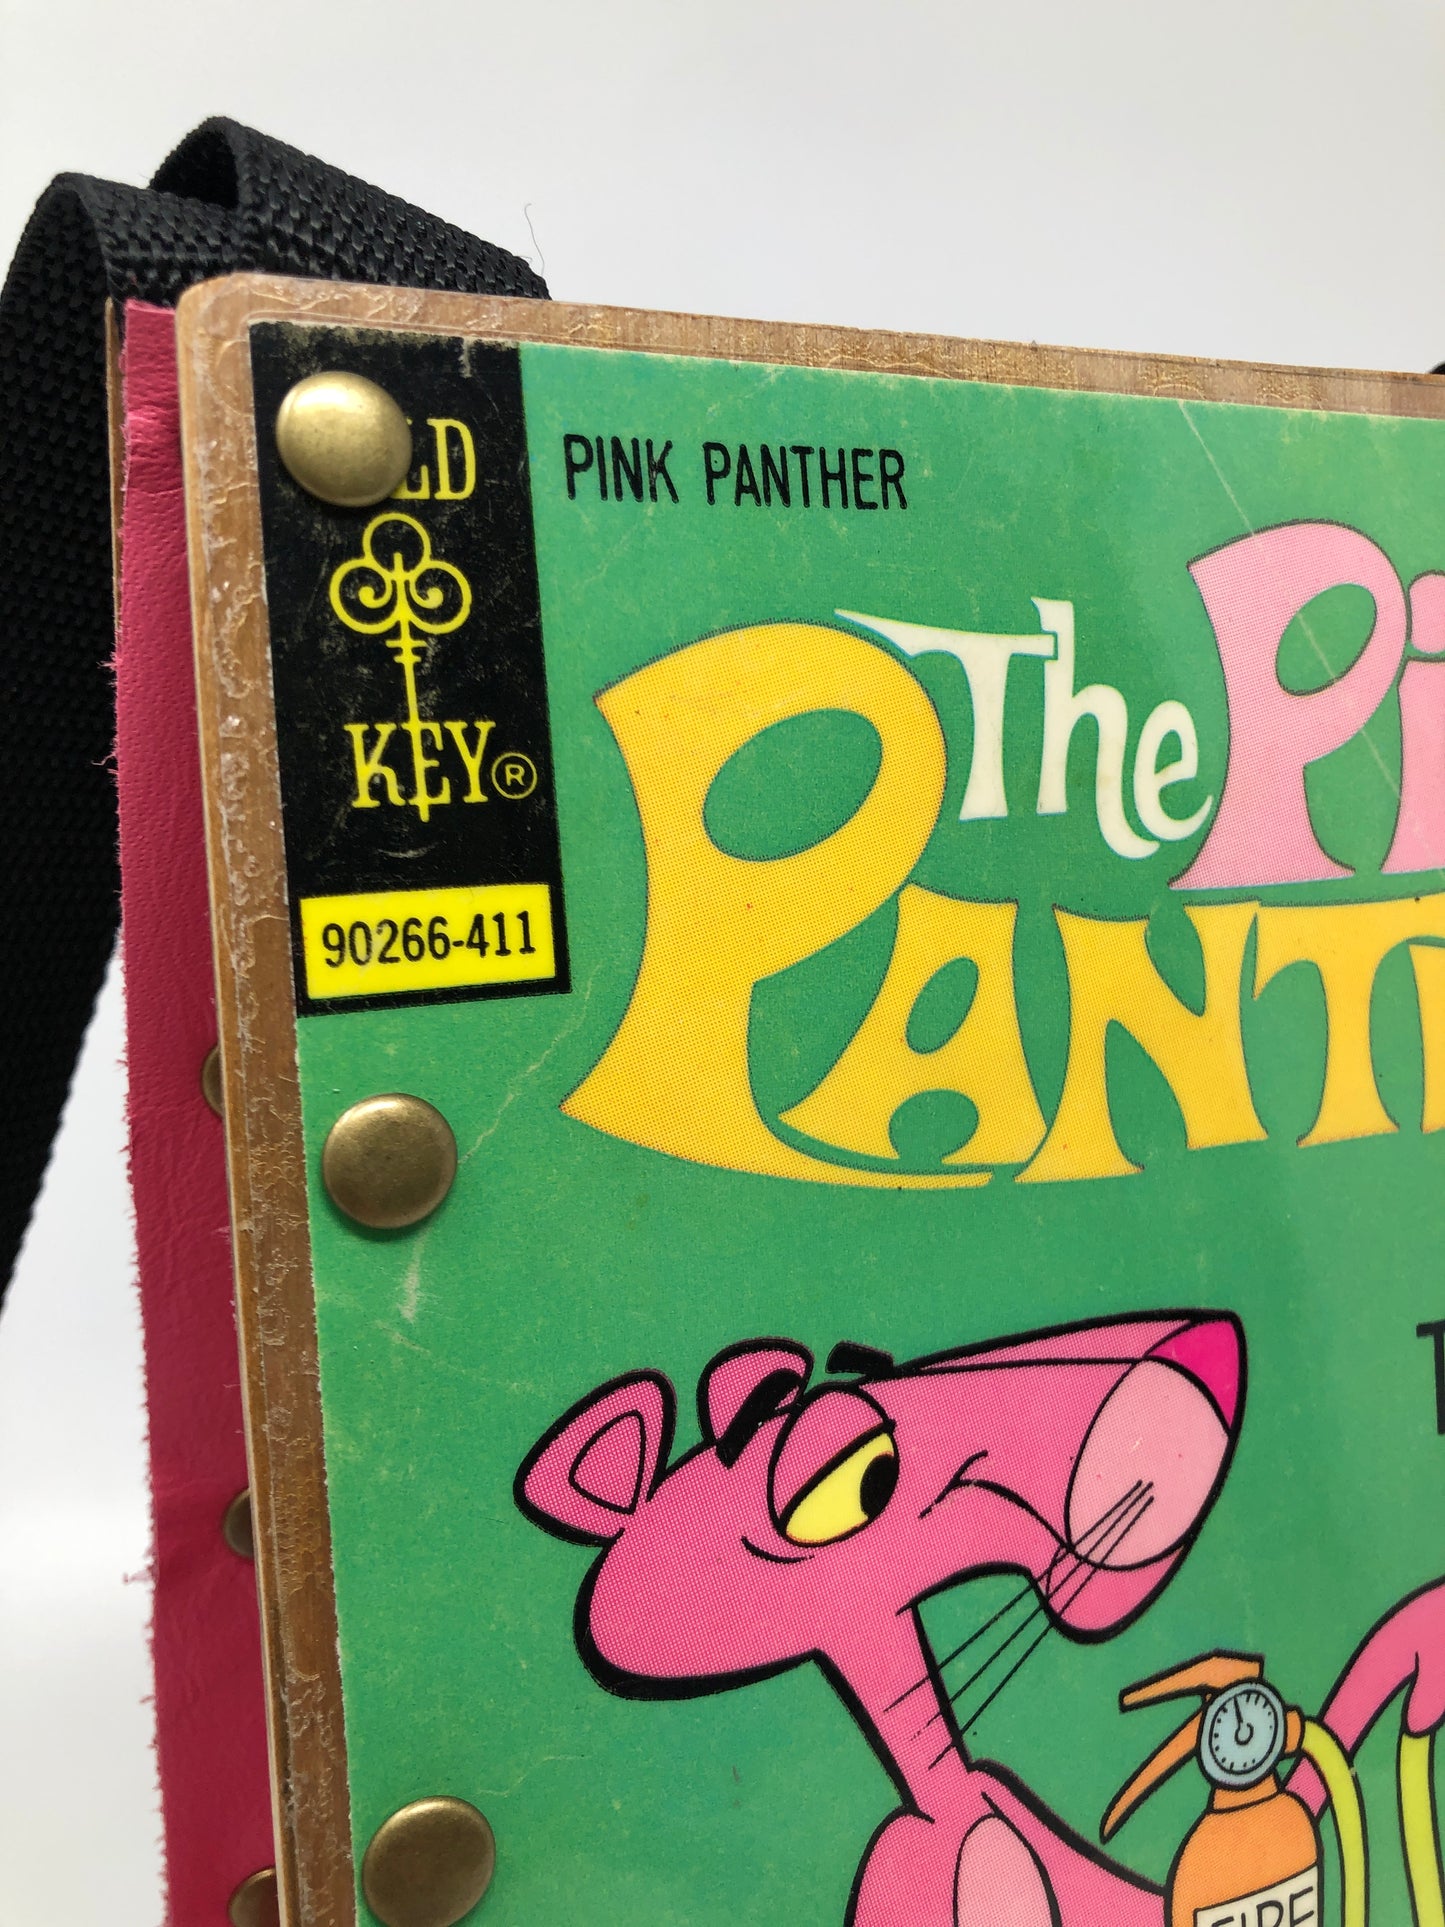 Vintage Handcrafted Gold Key Cartoon Purse - The Pink Panther and The Inspector November 1974